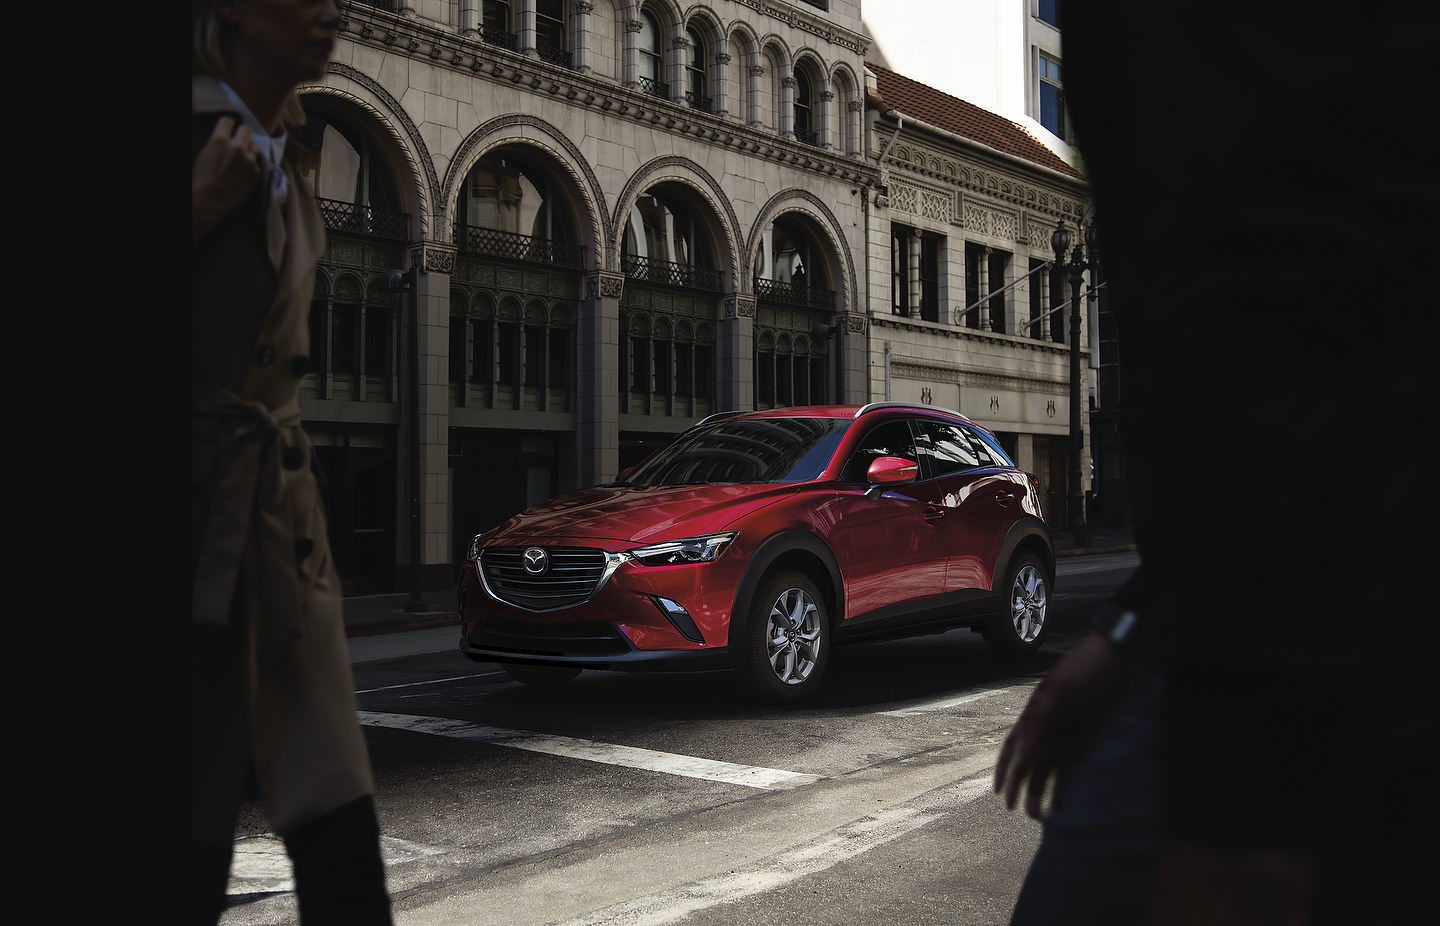 The Certified Pre-Owned Mazda Advantage: A Few Reasons to Make the Jump